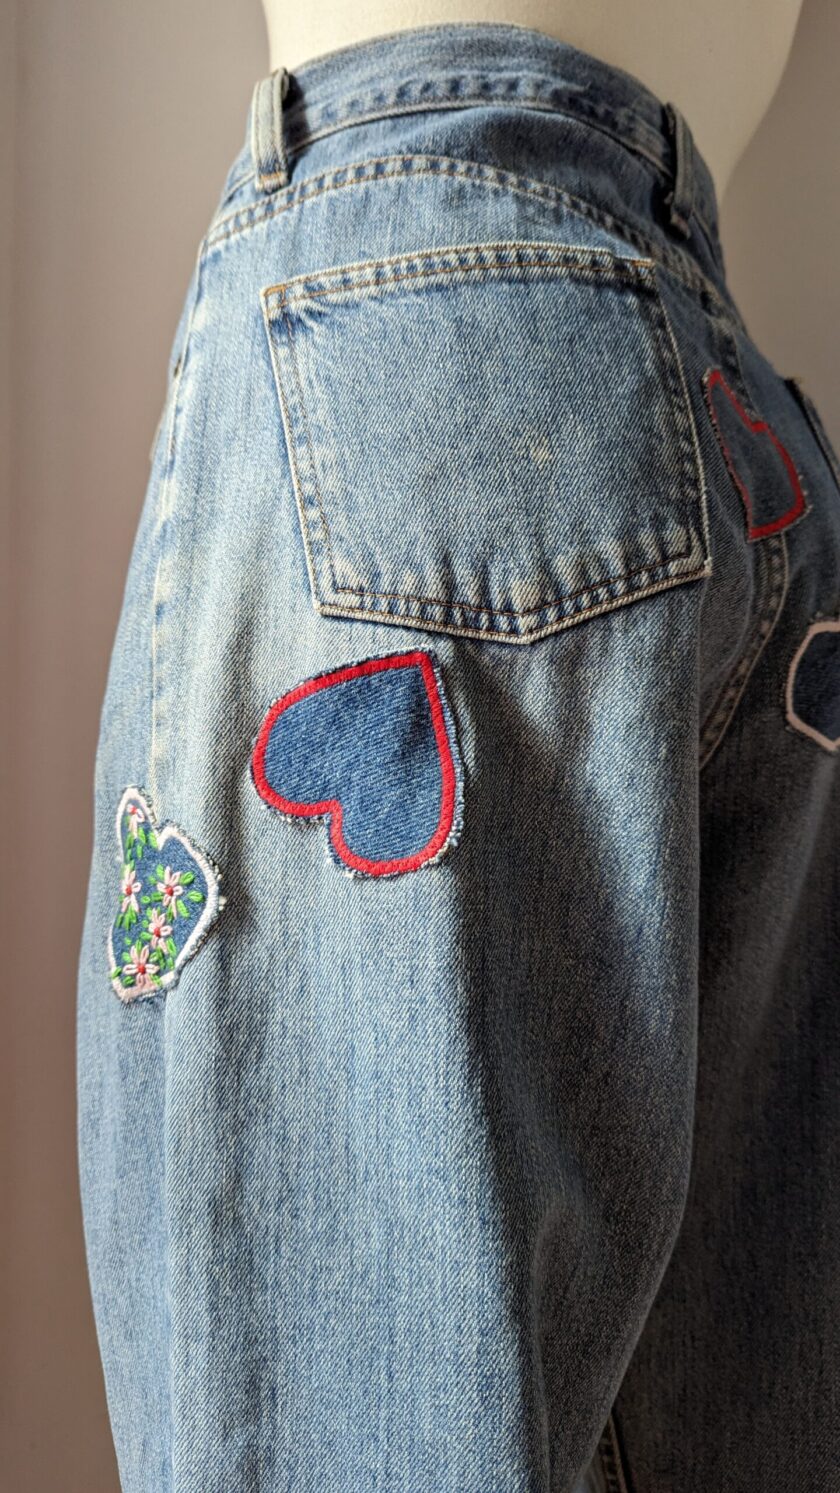 A mannequin wearing a pair of jeans with heart patches.